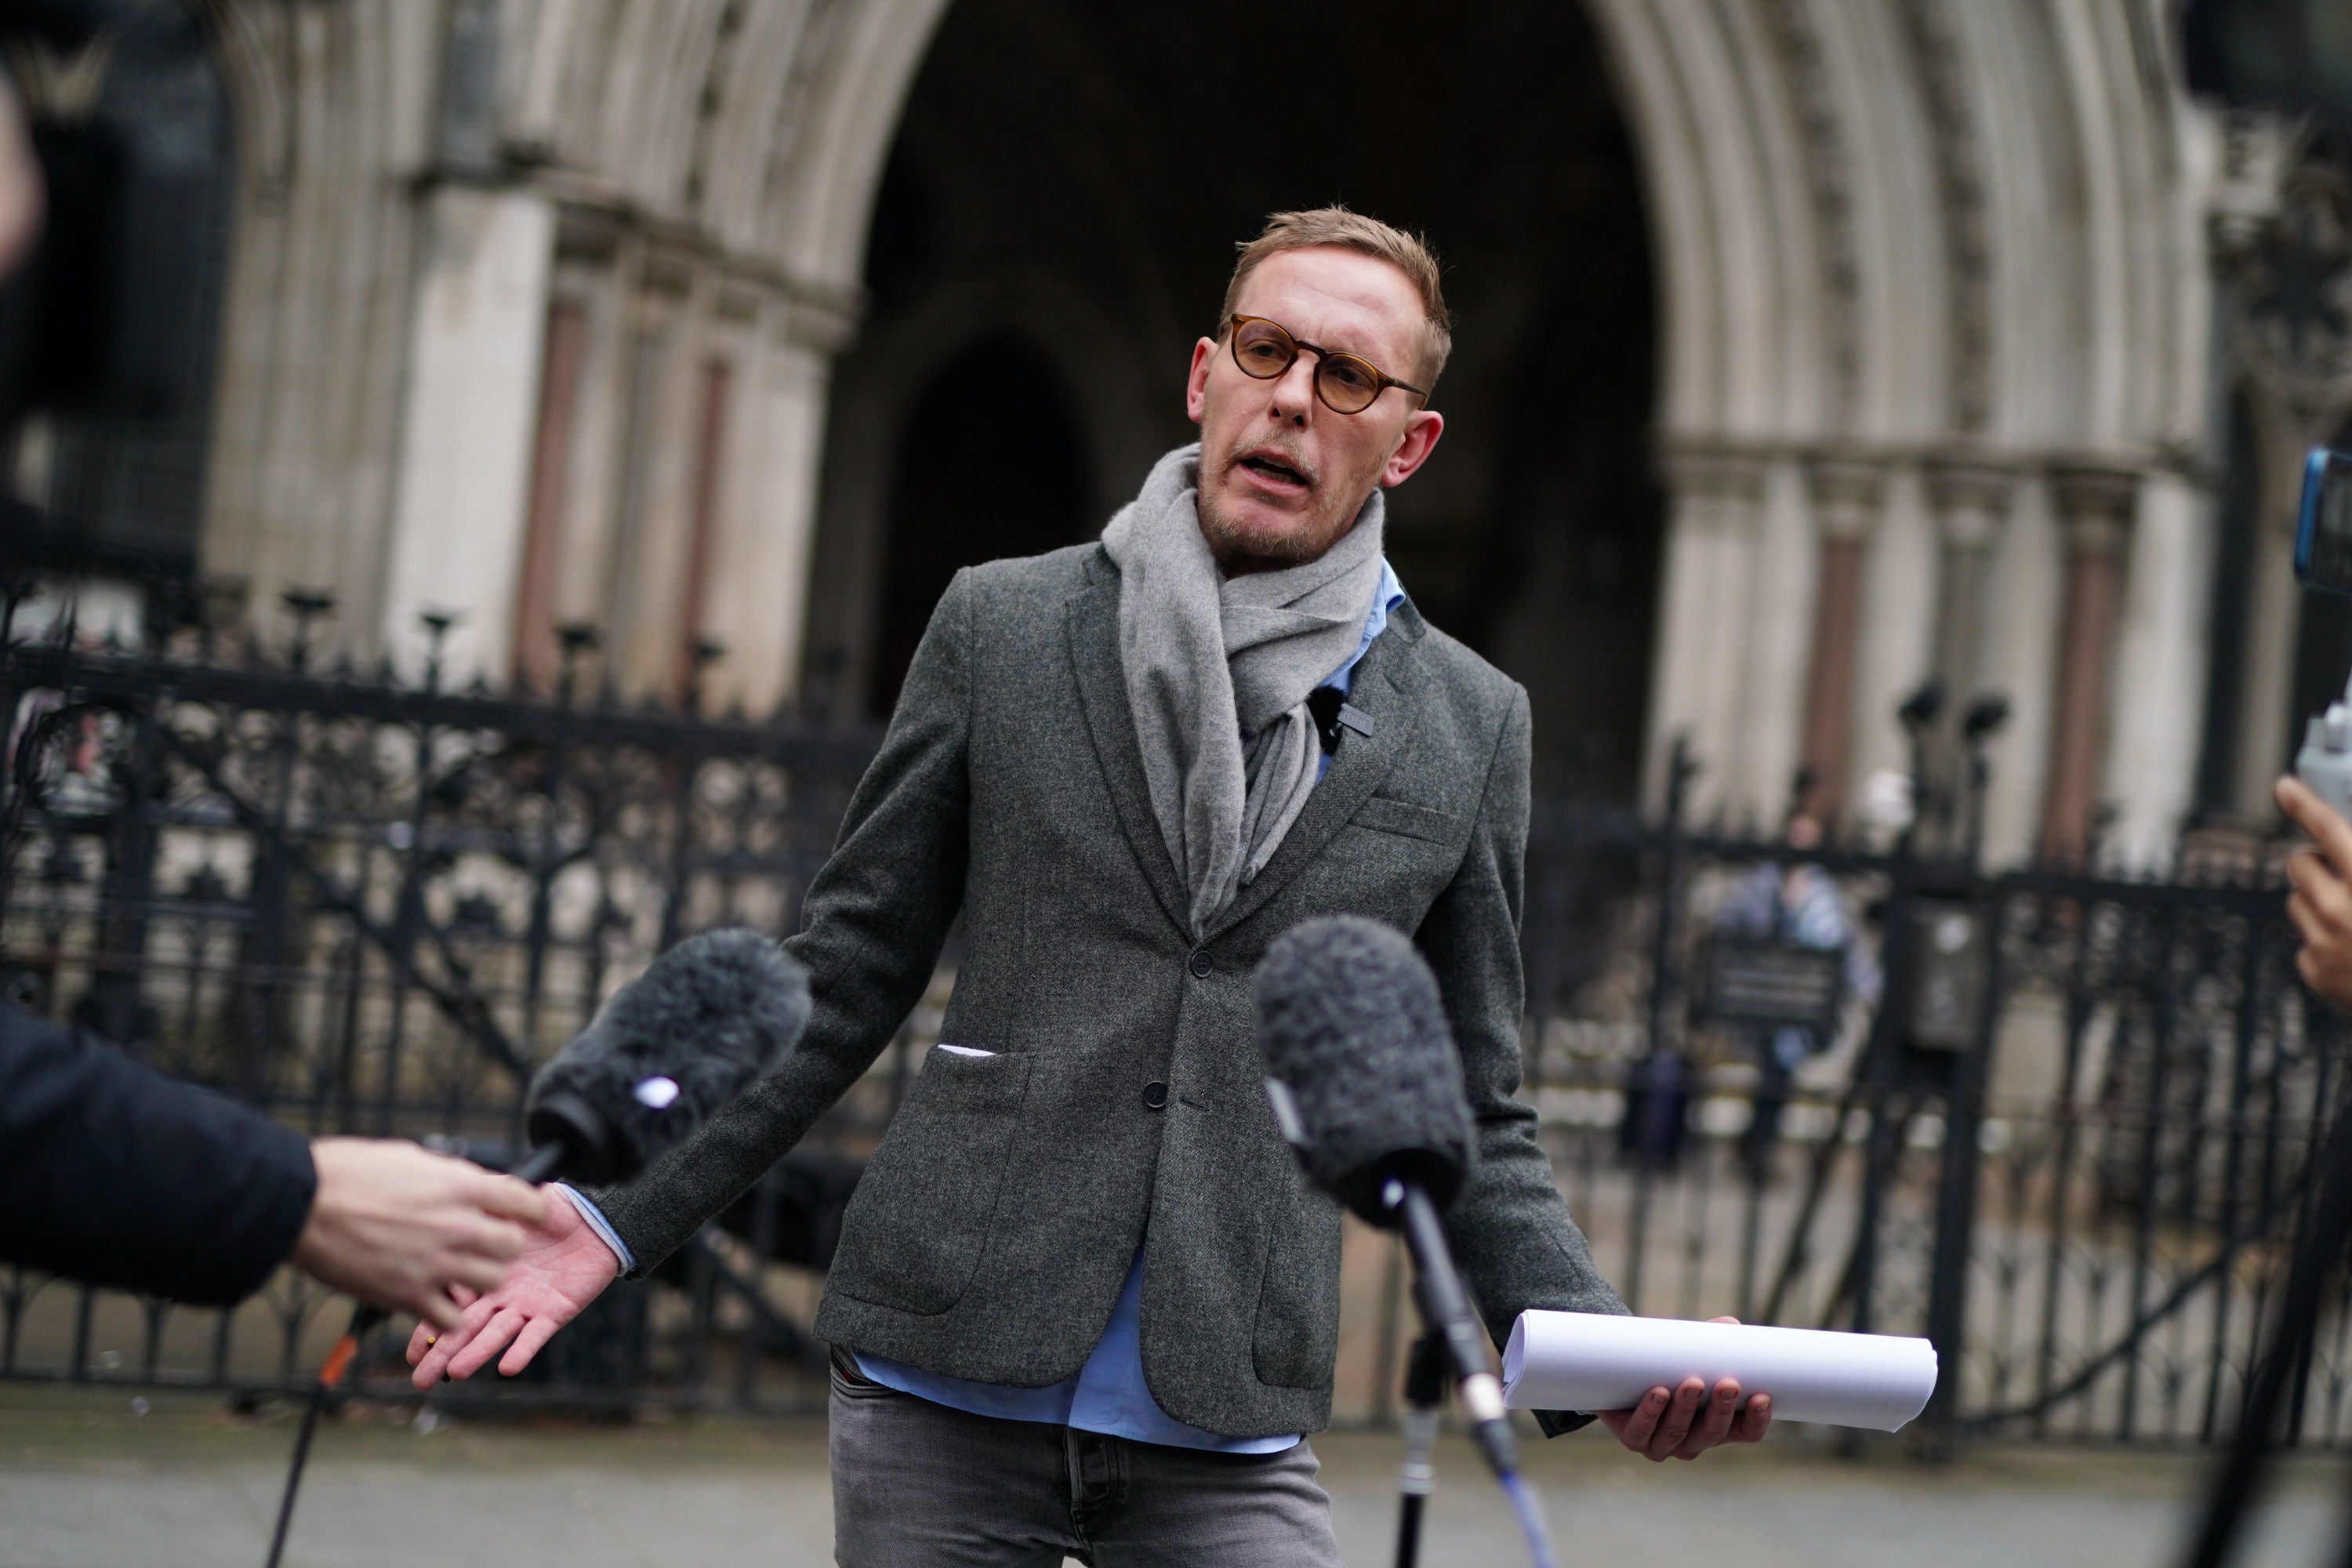 Laurence Fox lost a libel case in which he called several tweeters paedophiles